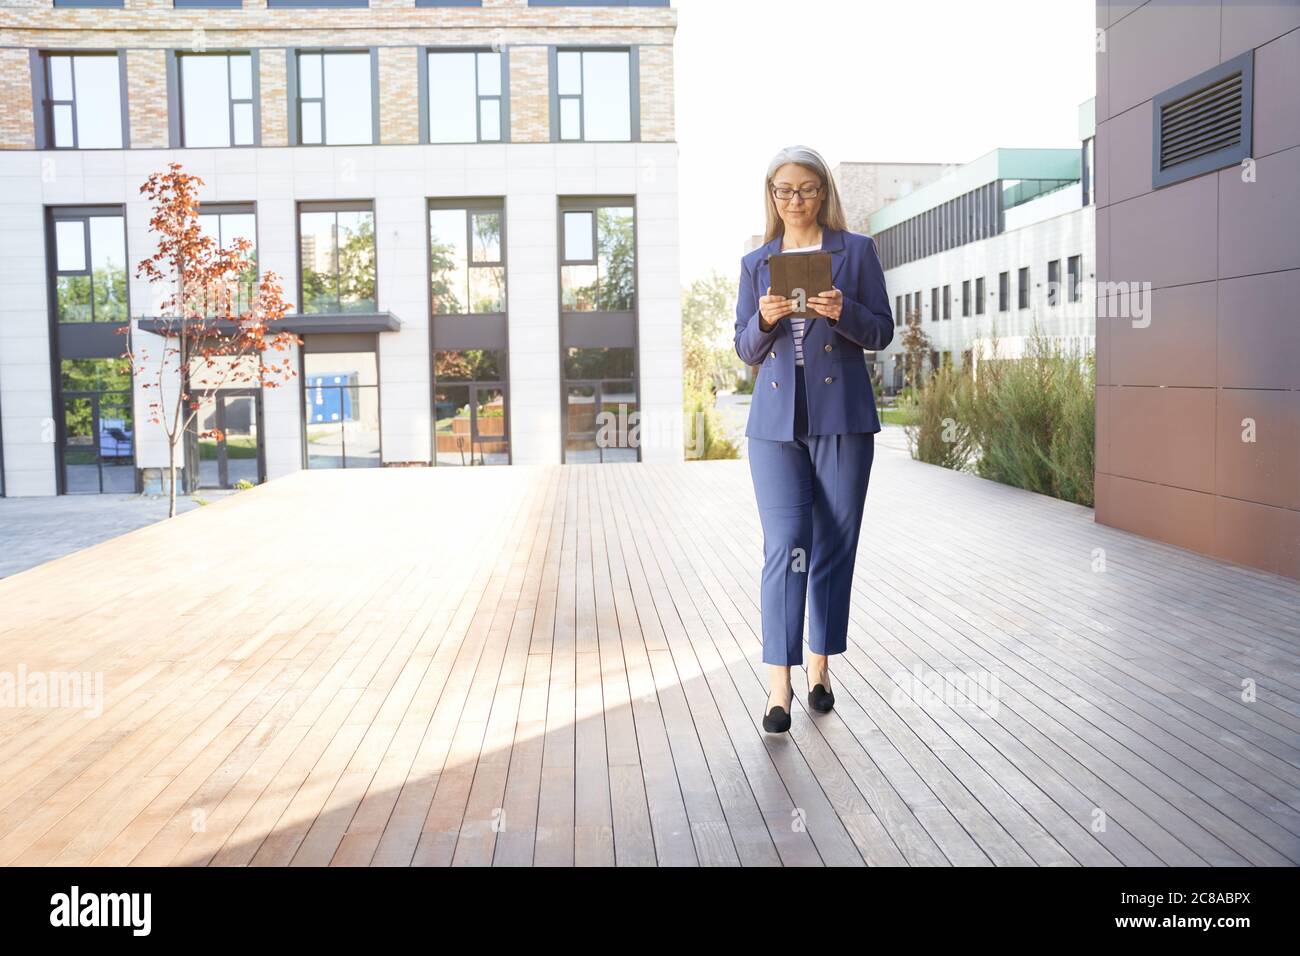 Working online. Portrait of a confident mature business woman in classic suit using digital tablet standing against office building outdoors. Checking email. Business people and modern technologies Stock Photo